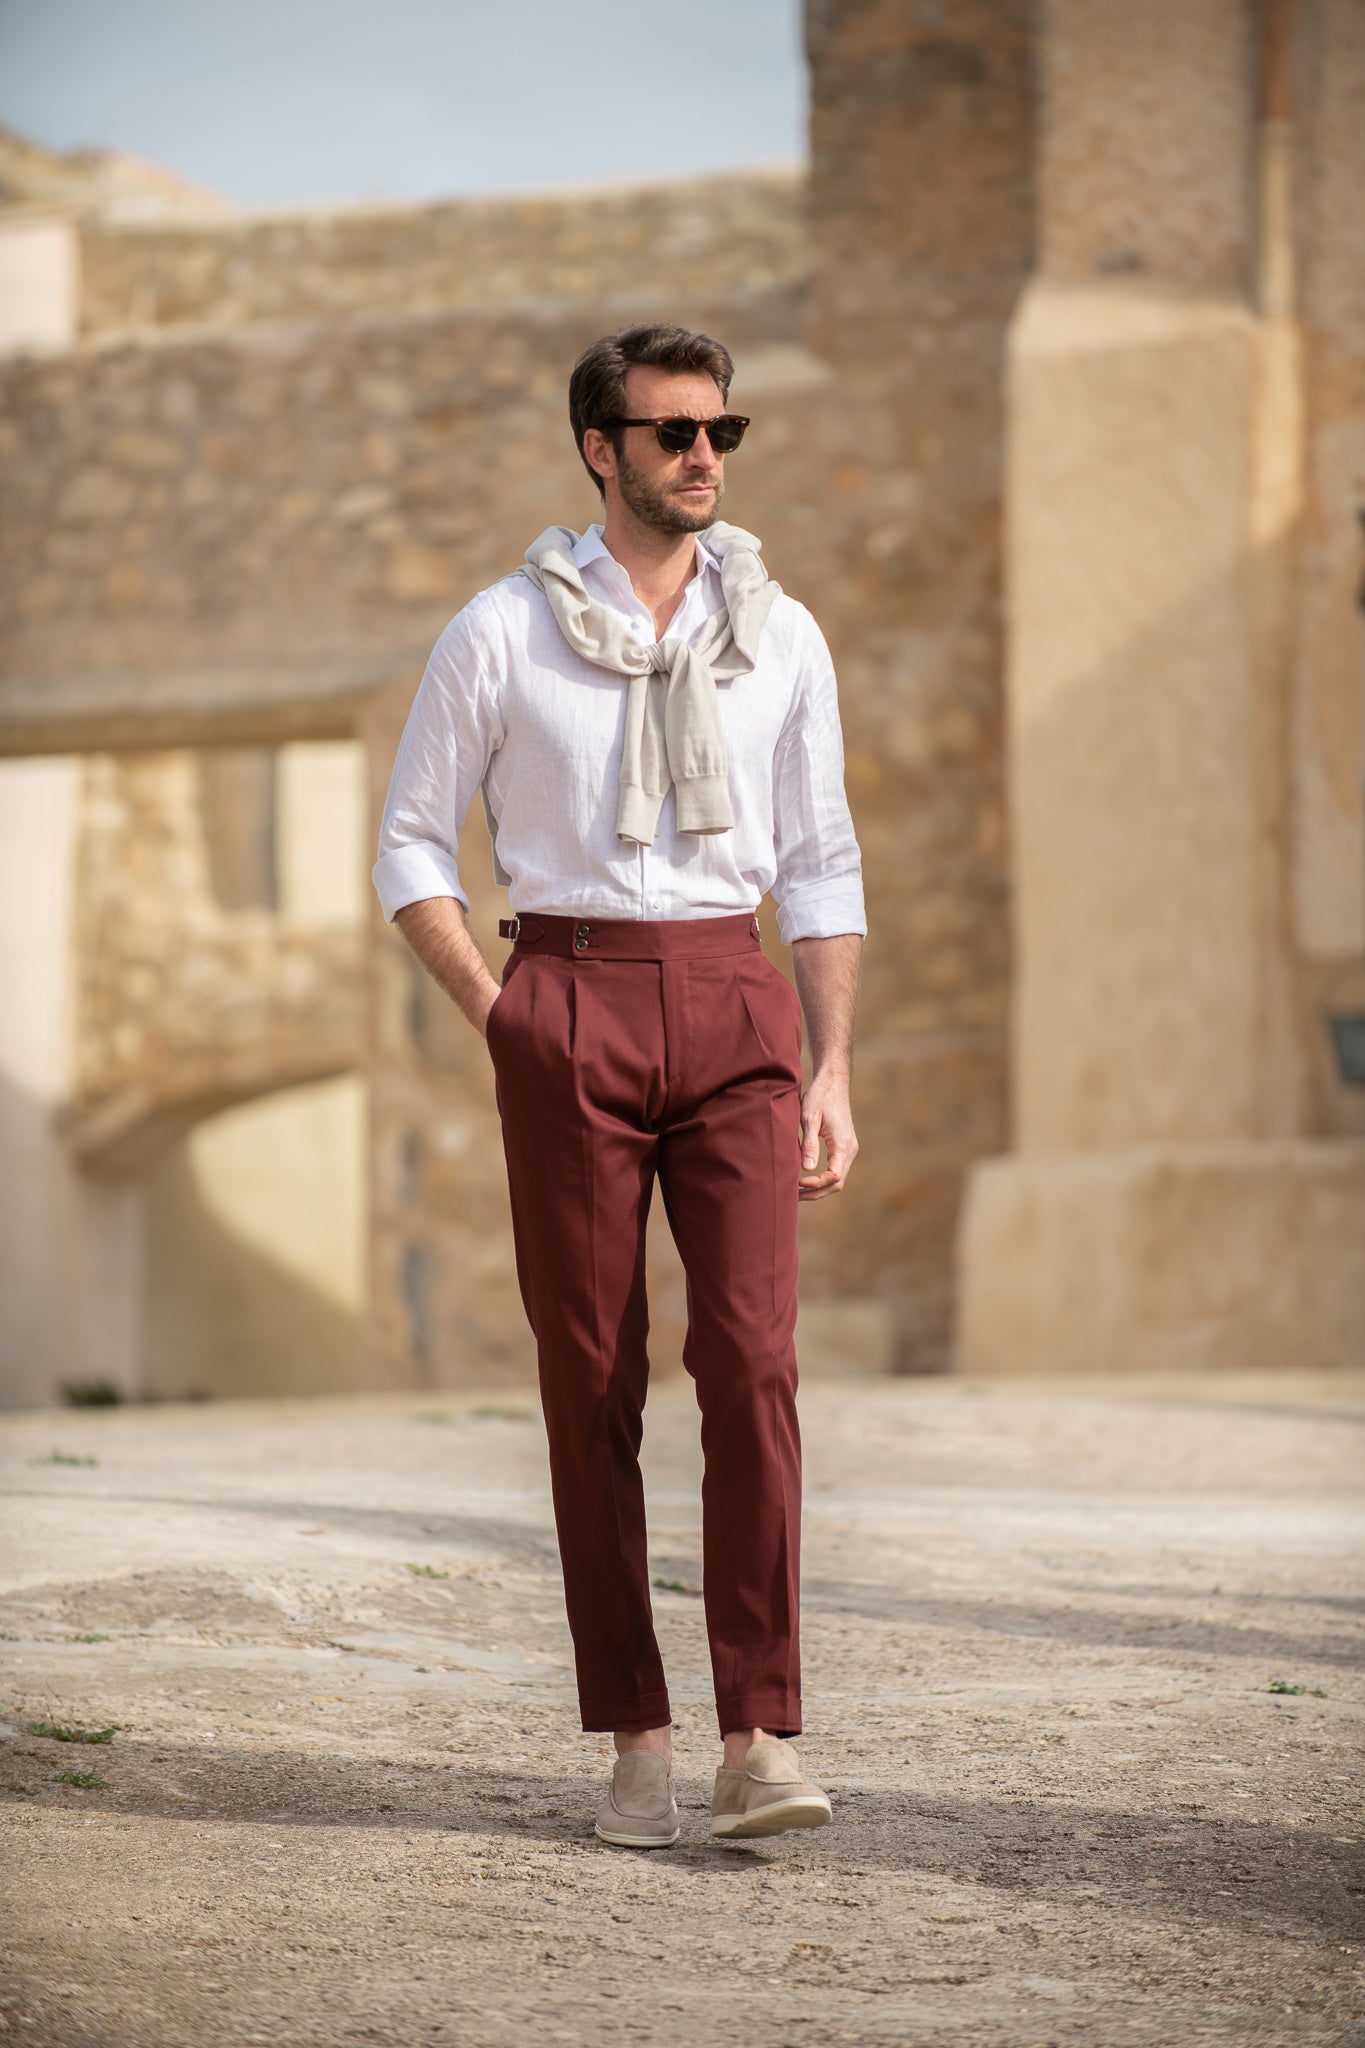 Pantaloni bordeaux in cotone " Soragna Capsule Collection" - Made in Italy